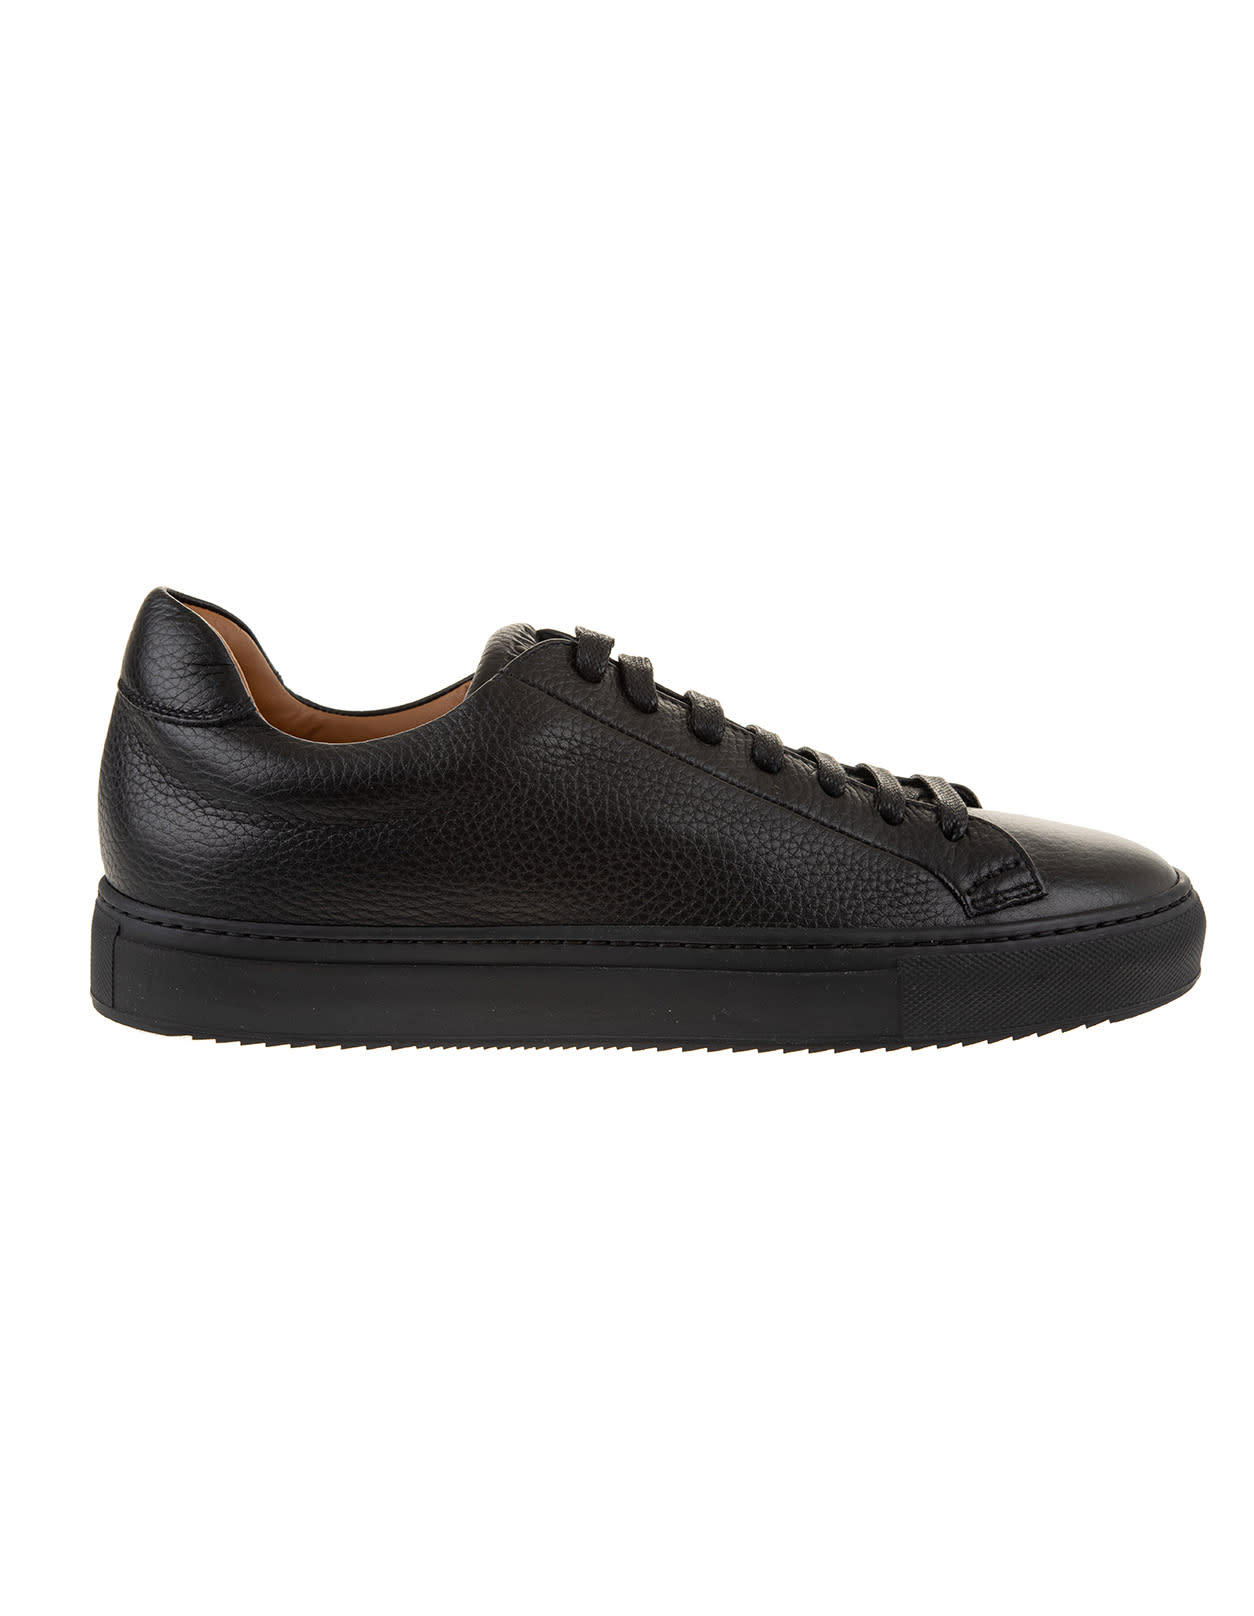 Doucals Man Black Hammered Leather Sneakers